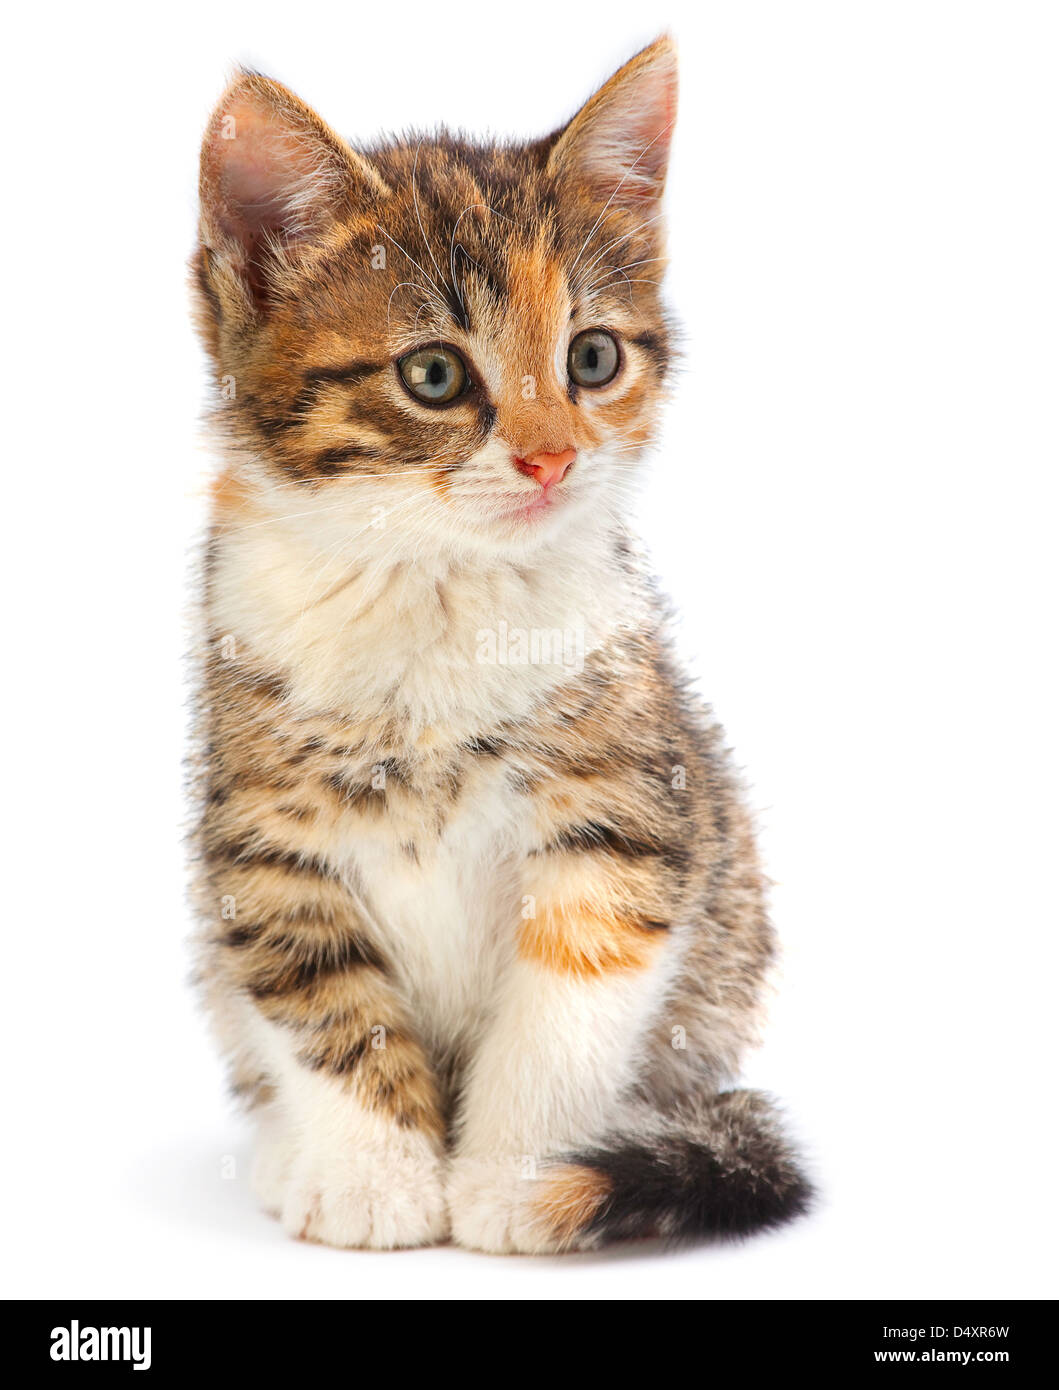 Young kitten sitting isolated on white Stock Photo